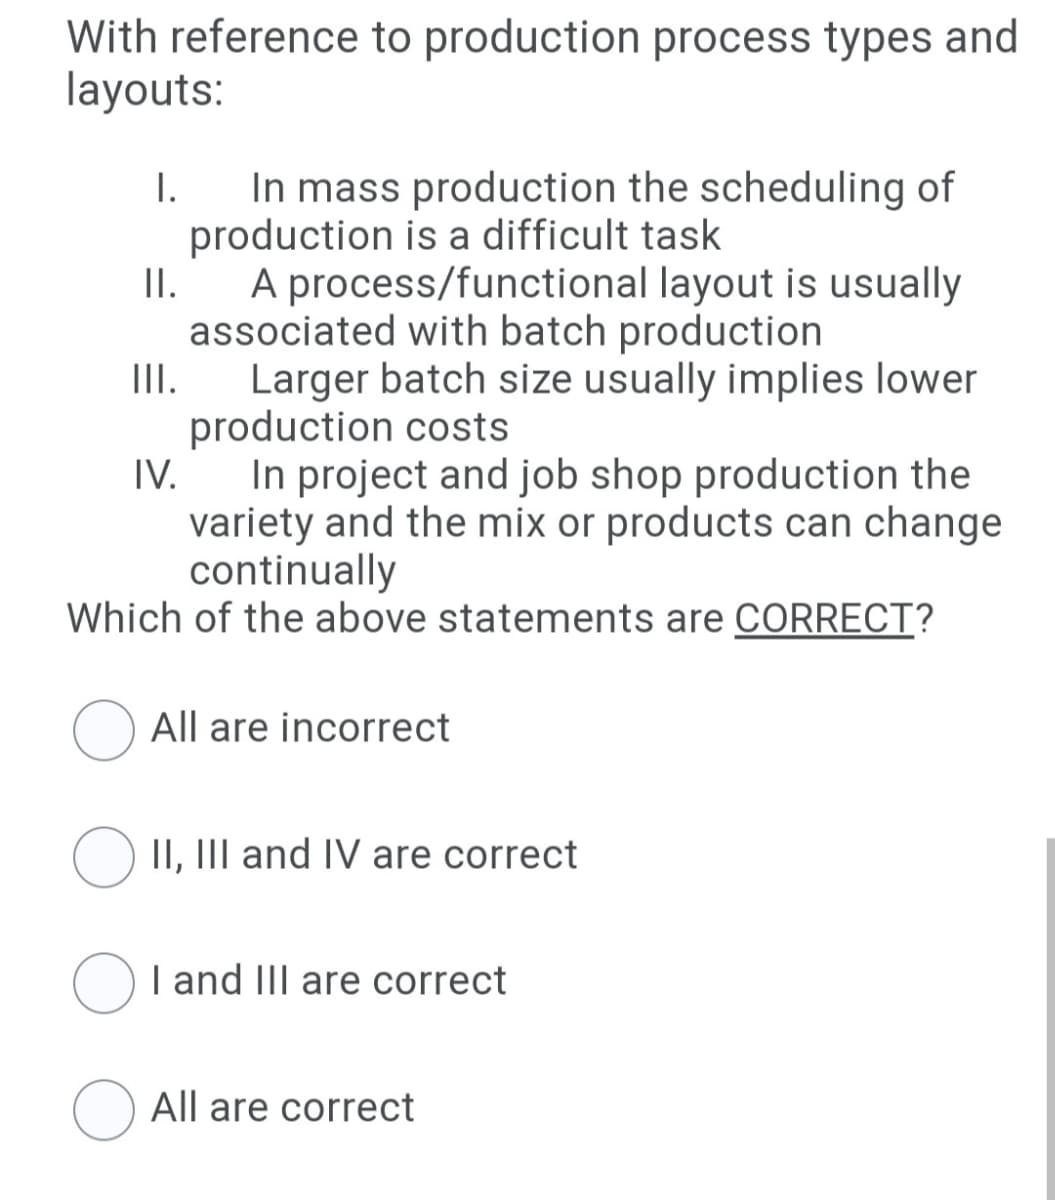 With reference to production process types and
layouts:
In mass production the scheduling of
production is a difficult task
I.
I.
A process/functional layout is usually
associated with batch production
III.
Larger batch size usually implies lower
production costs
IV.
In project and job shop production the
variety and the mix or products can change
continually
Which of the above statements are CORRECT?
O All are incorrect
O II, III and IV are correct
I and III are correct
All are correct
